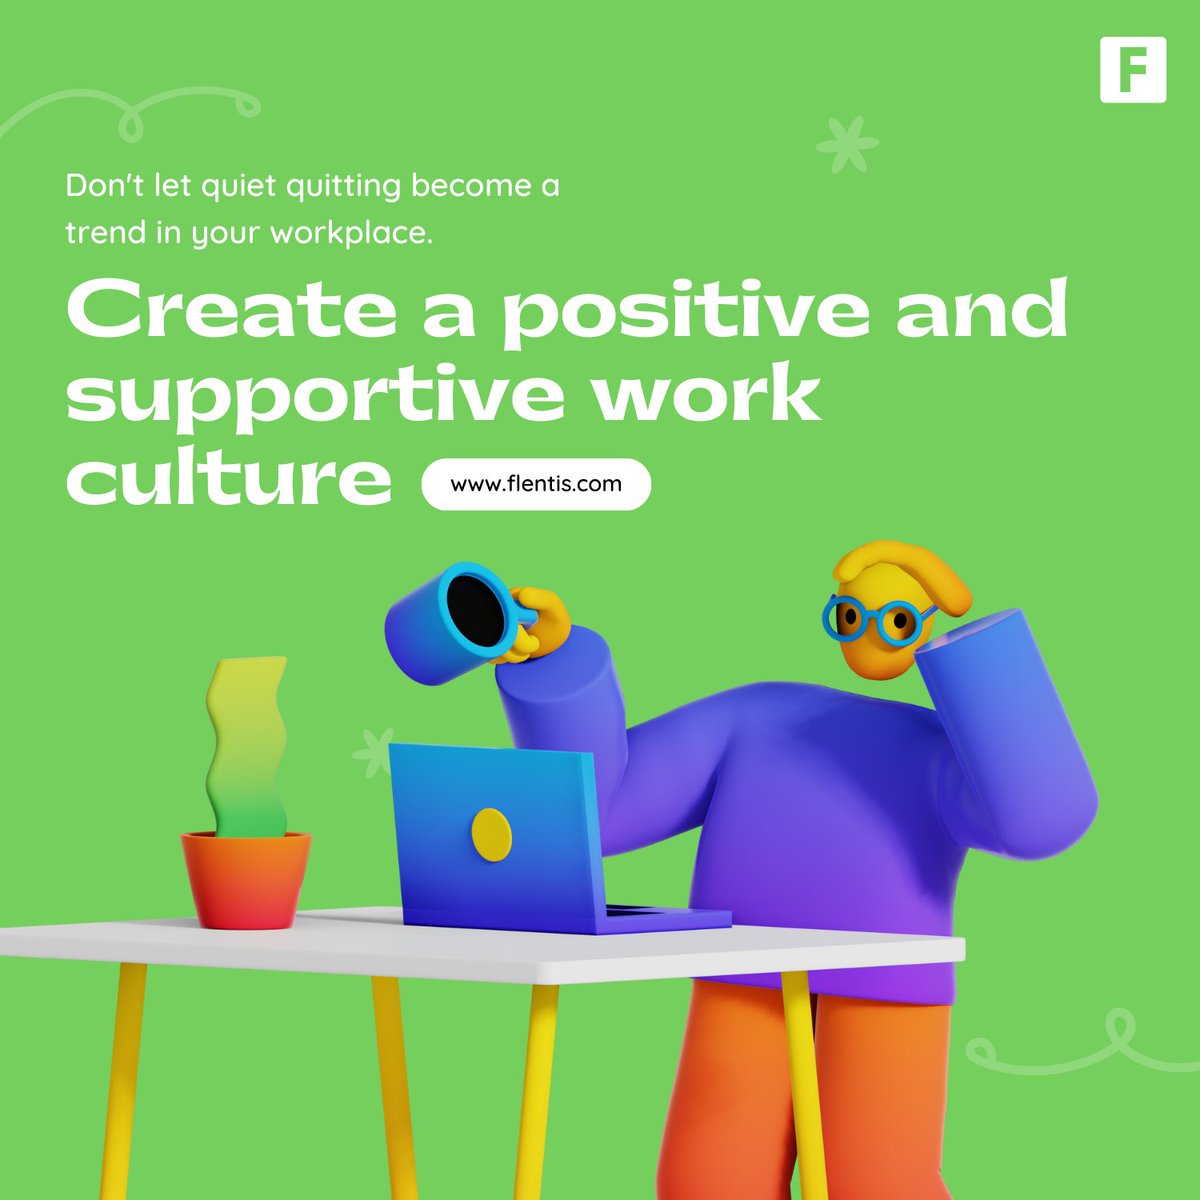 Keeping in mind the latest trend of quit quitting, create a culture that inspires employees to stay engaged and committed.

#flentis #msp #vms #managedserviceprovider #flentispro #workforcemanagement  #vendormanagementsystem #recruitment #contingentworkforce #permanentjobs